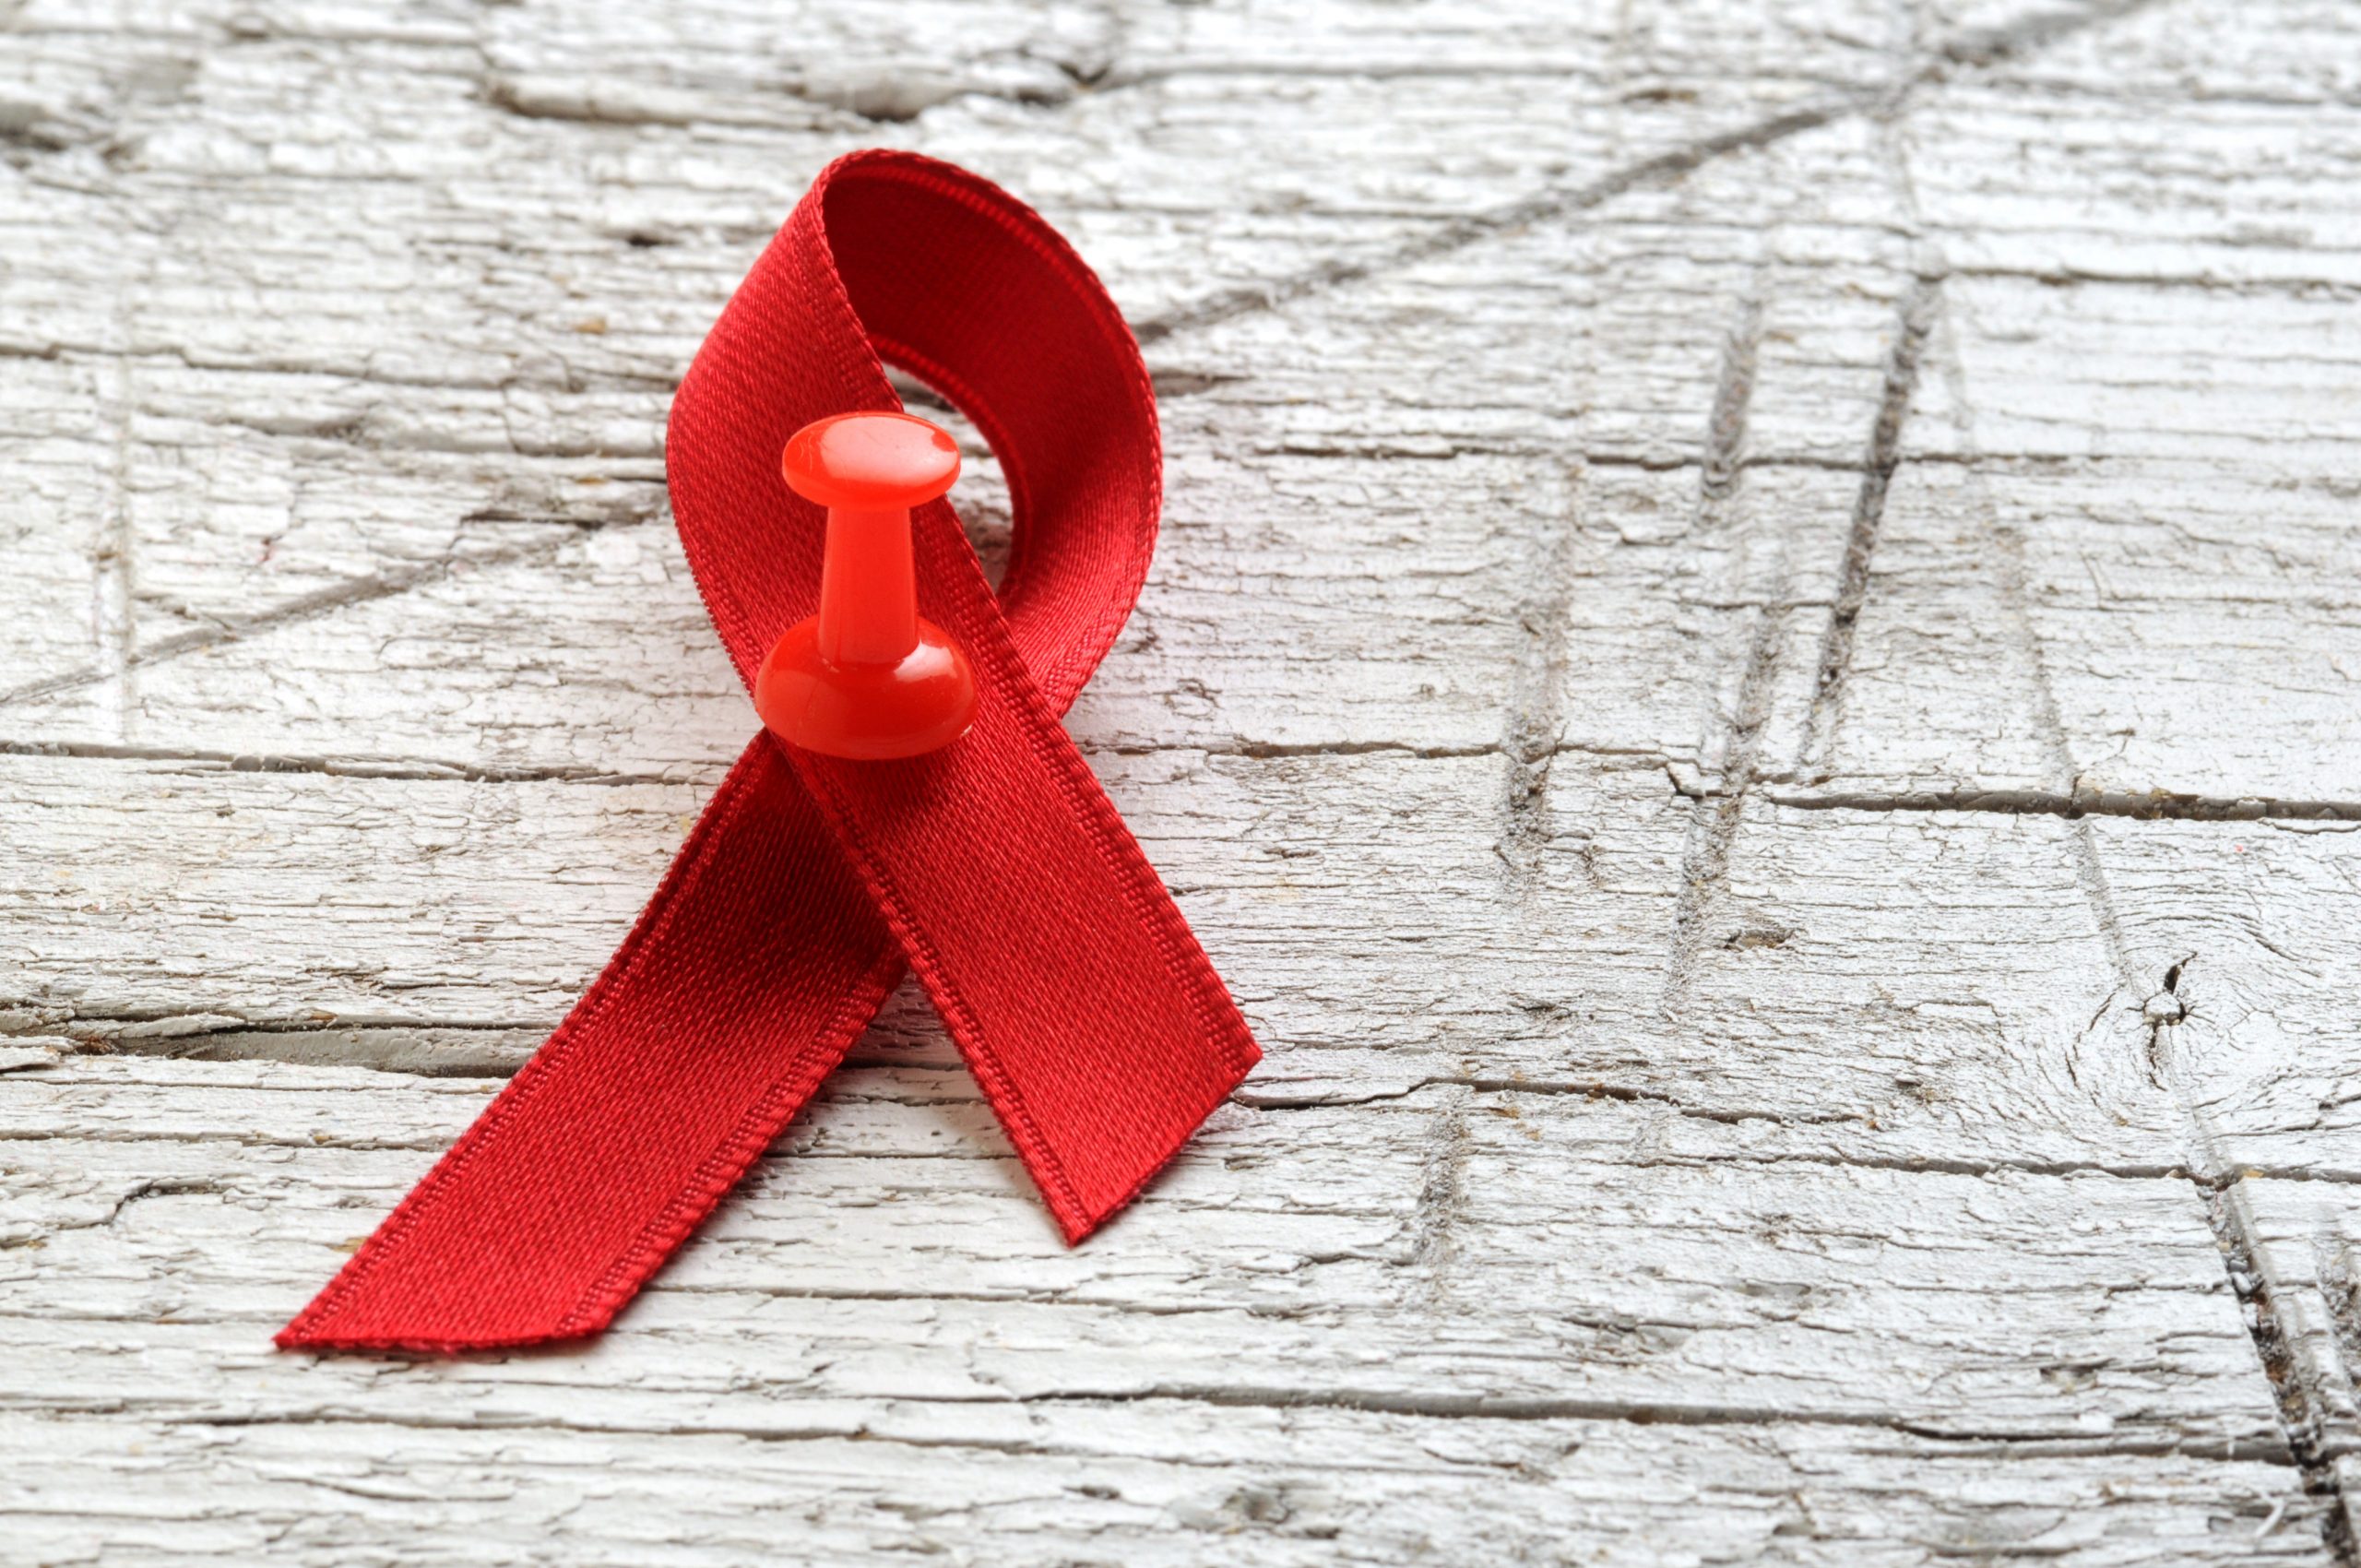 HIV: The Antibodies of “Post-treatment Controllers”